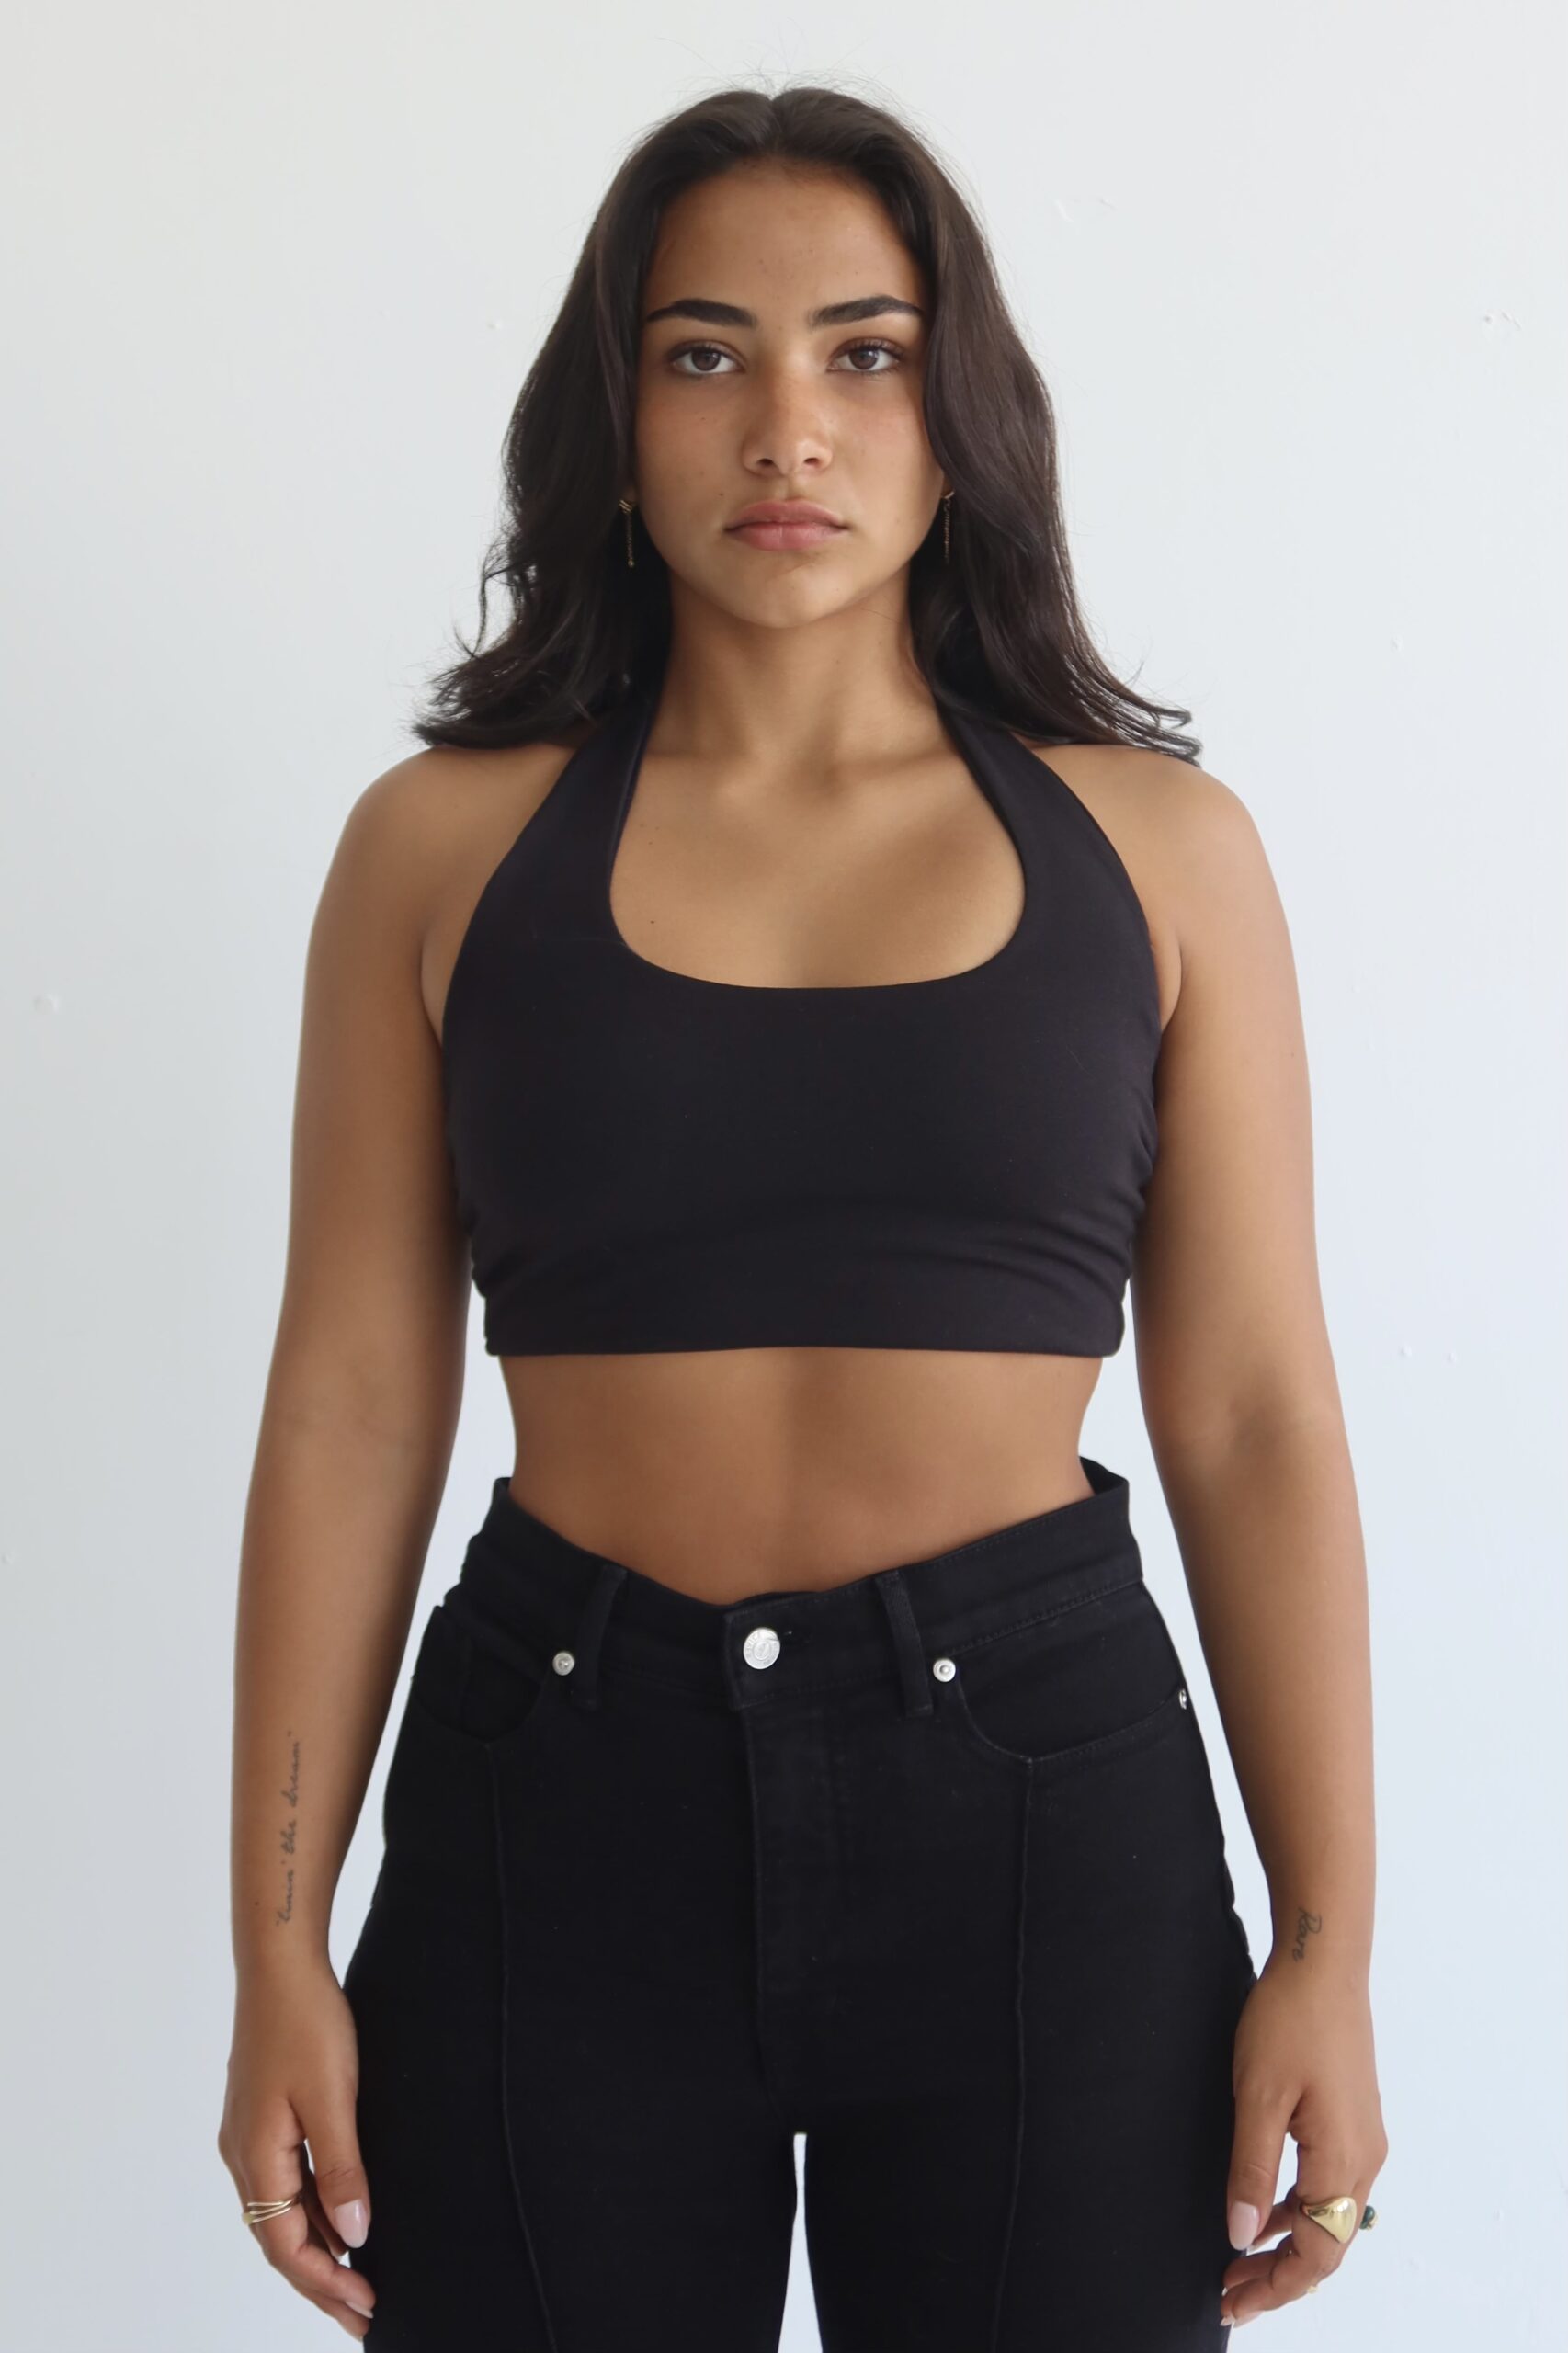 Girl standing against a white backdrop, wearing black jeans and a black halter top with her dark brown hair loosely around her shoulders.